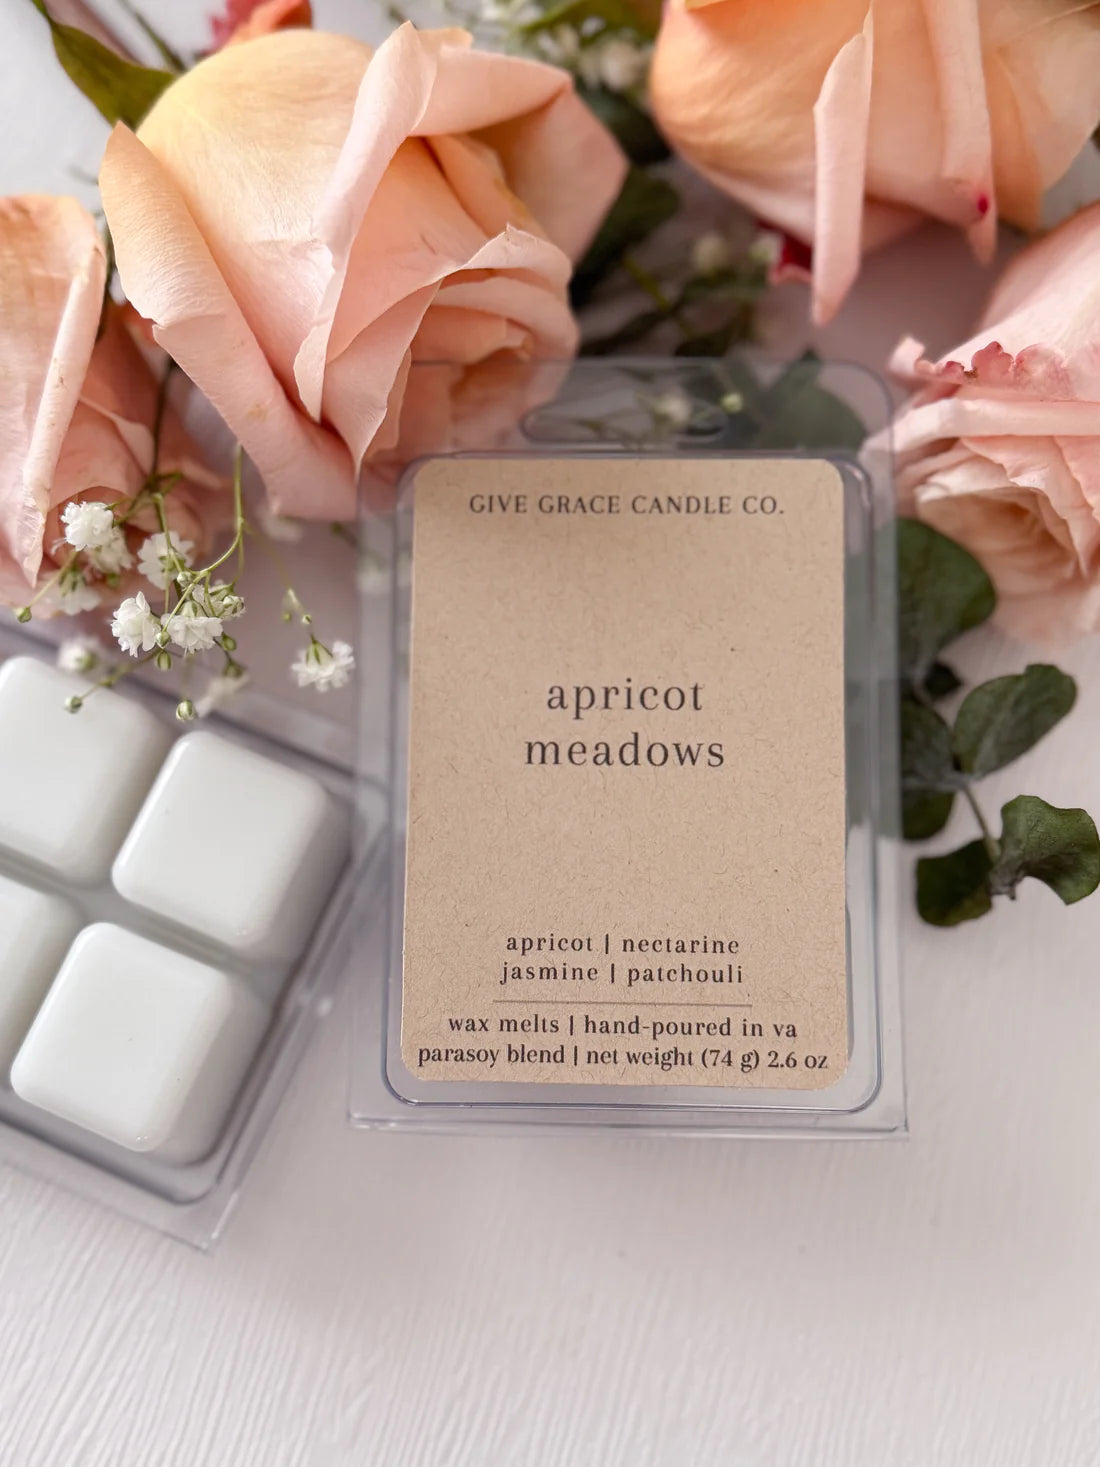 Give Grace Candle Co. - Apricot Meadows Wax Melts